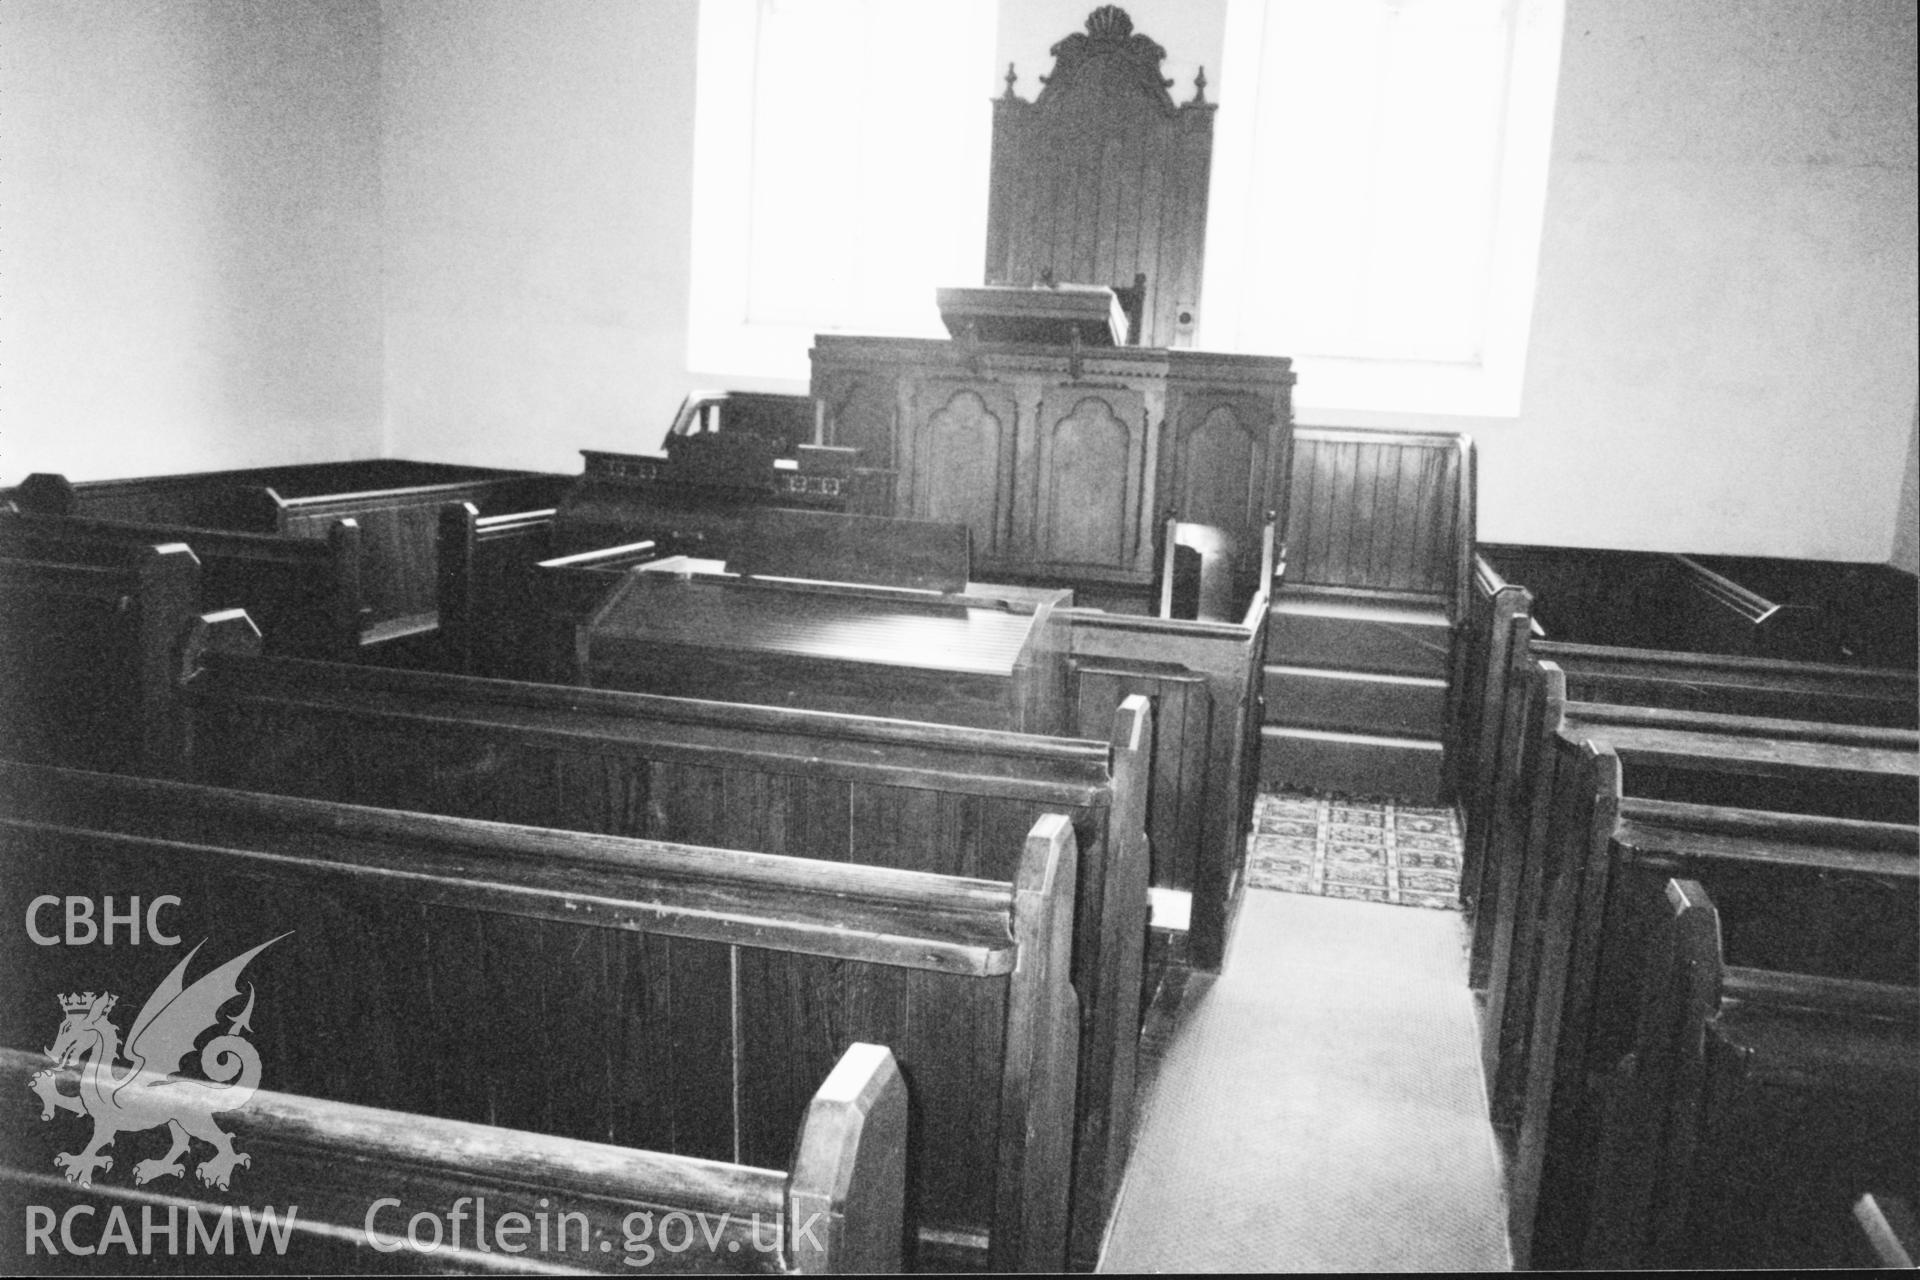 Digital copy of a black and white photograph showing an interior view of Bwlchgwynt Baptist Chapel, taken by Robert Scourfield, 1996.